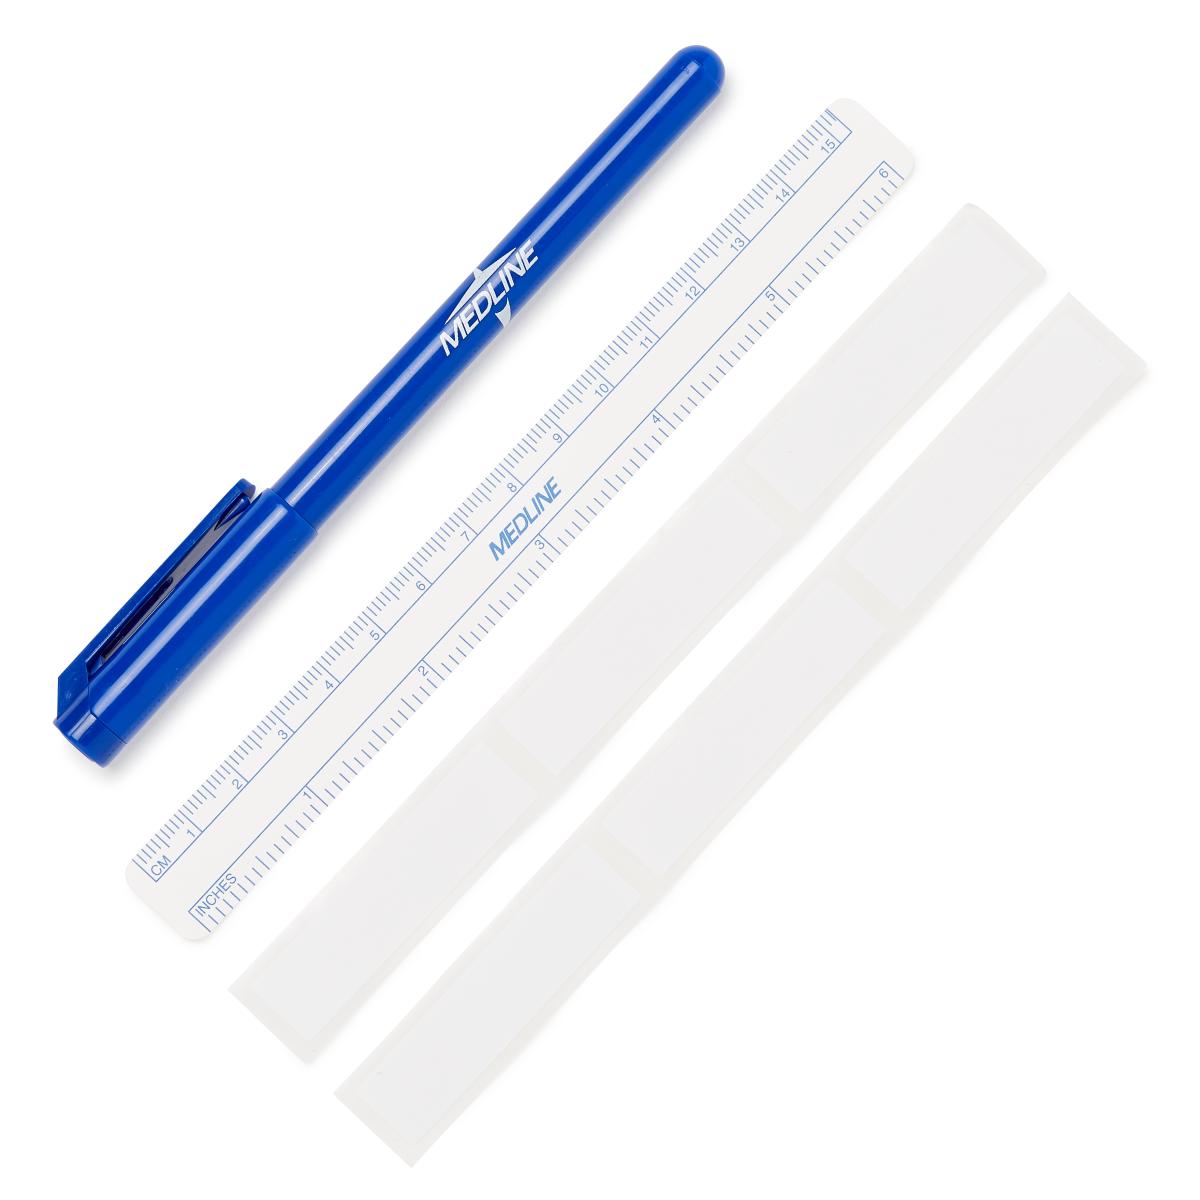 Saferly Mini Surgical Skin Markers — Sterilized and